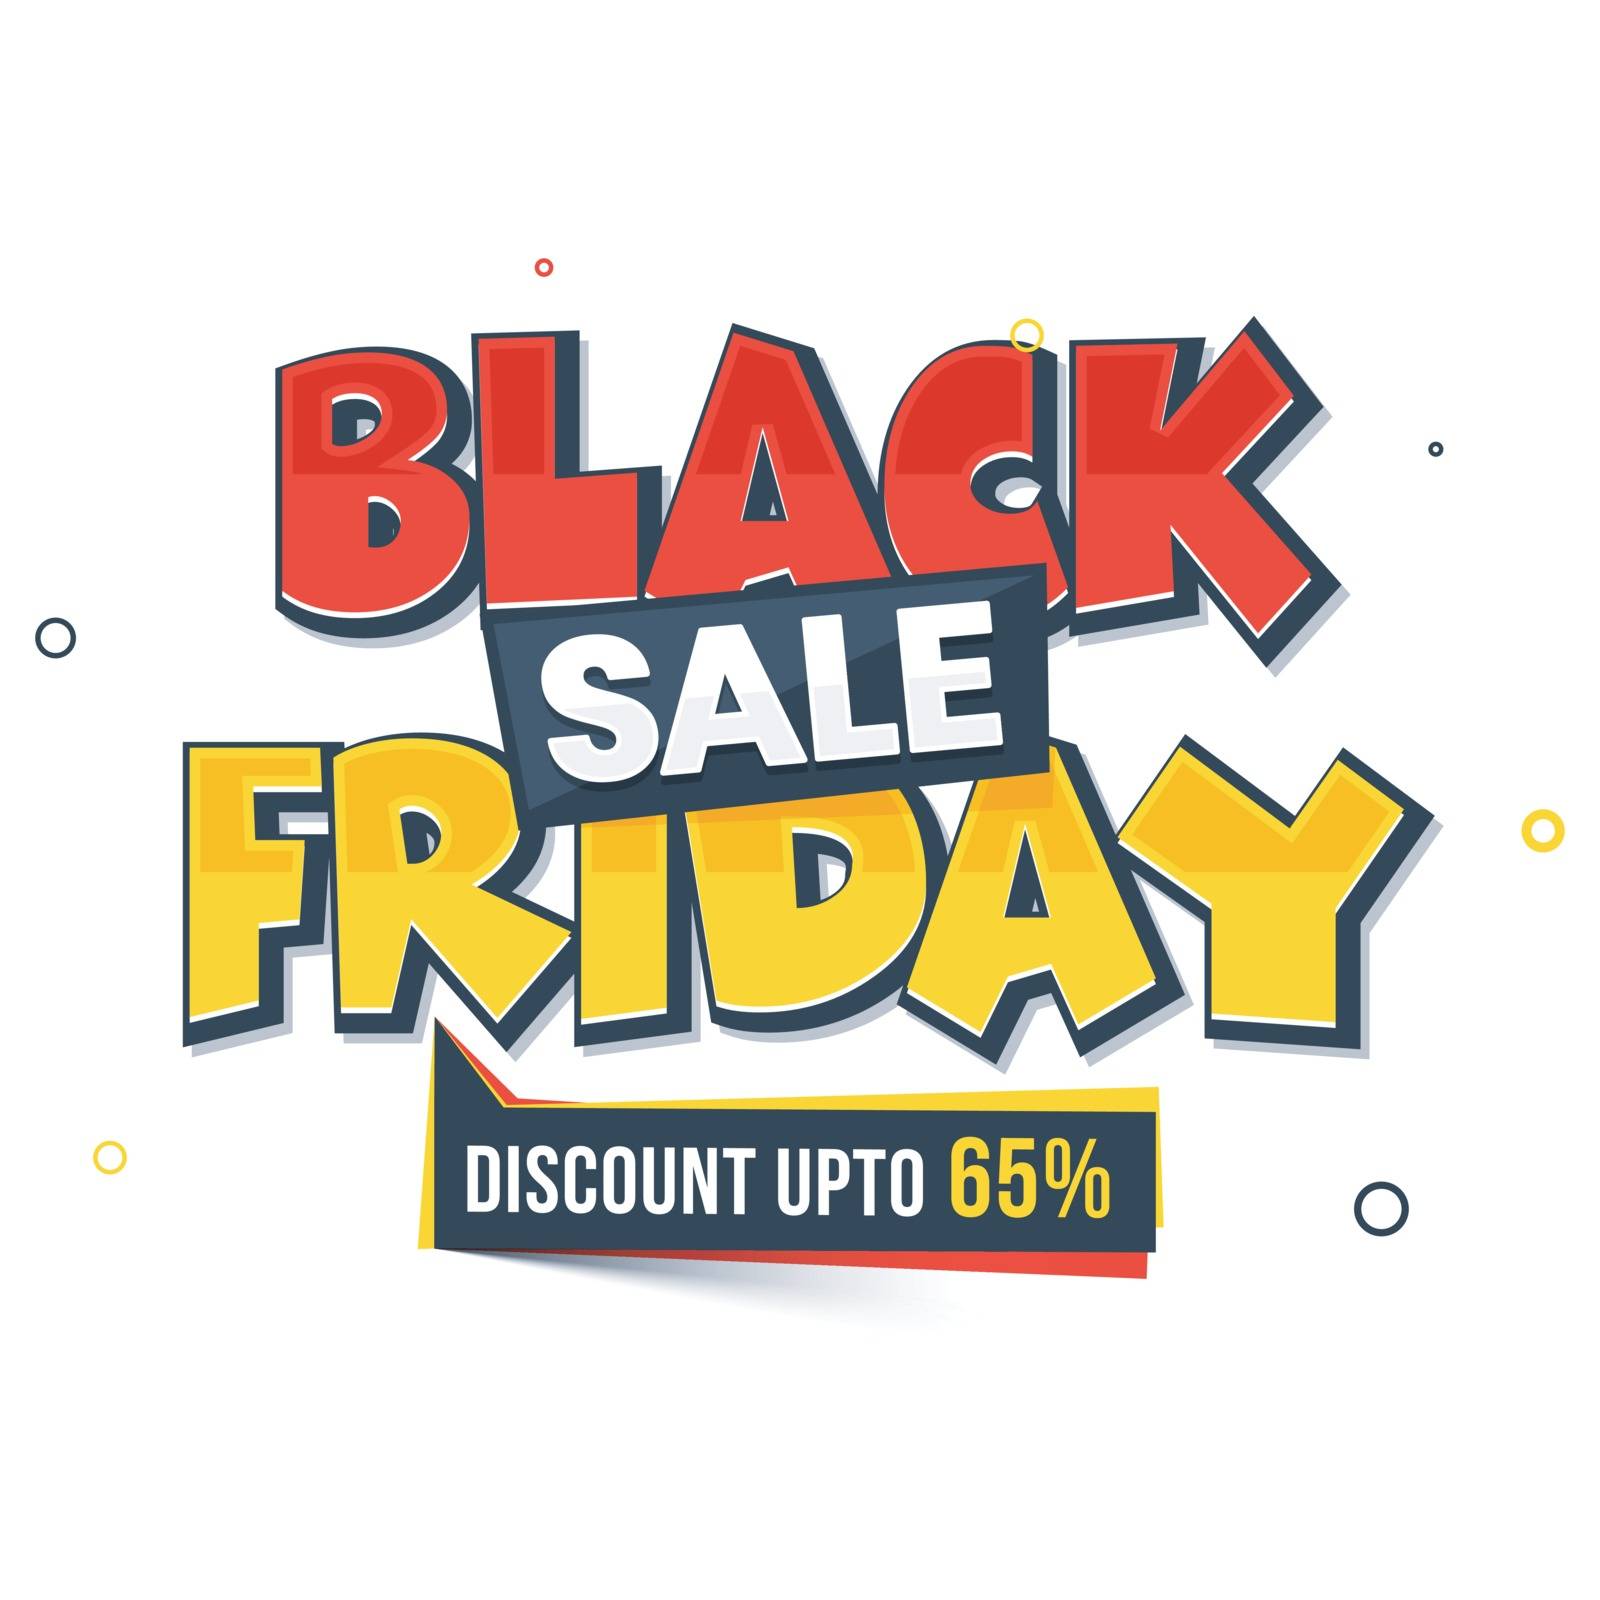 Black Friday Sale template or flyer design with 65% discount offer.